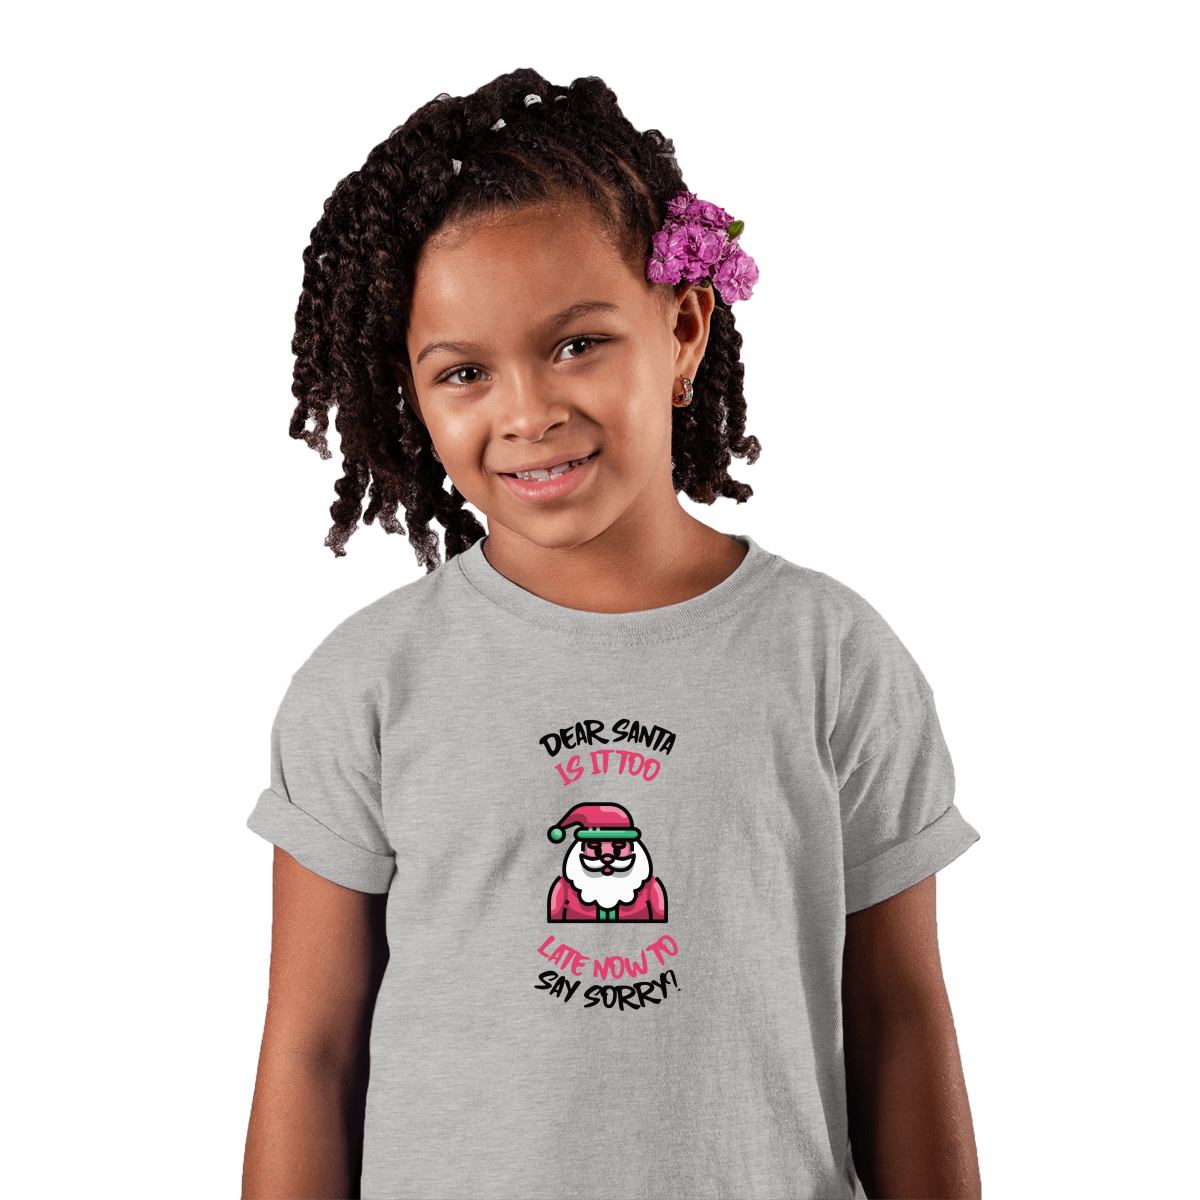 Dear Santa, Is It Too Late to Say Sorry? Kids T-shirt | Gray